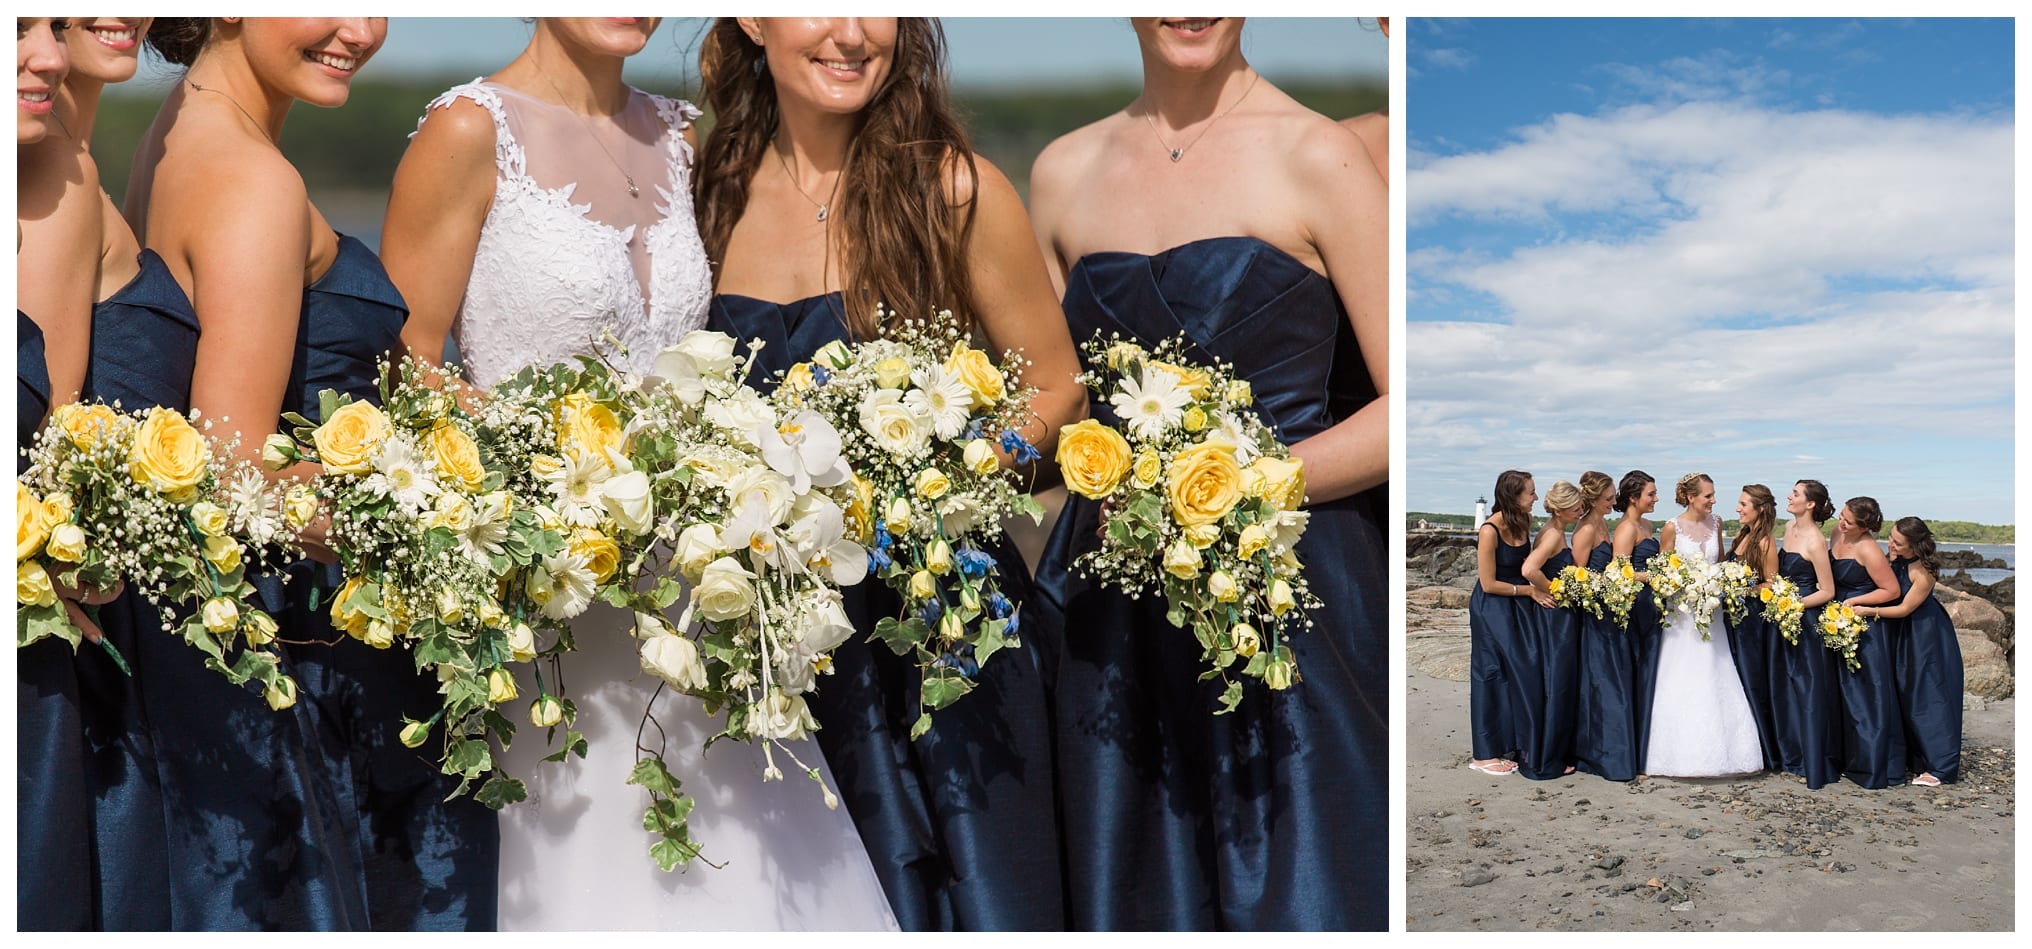 NH Weddings, Wentworth by the Sea